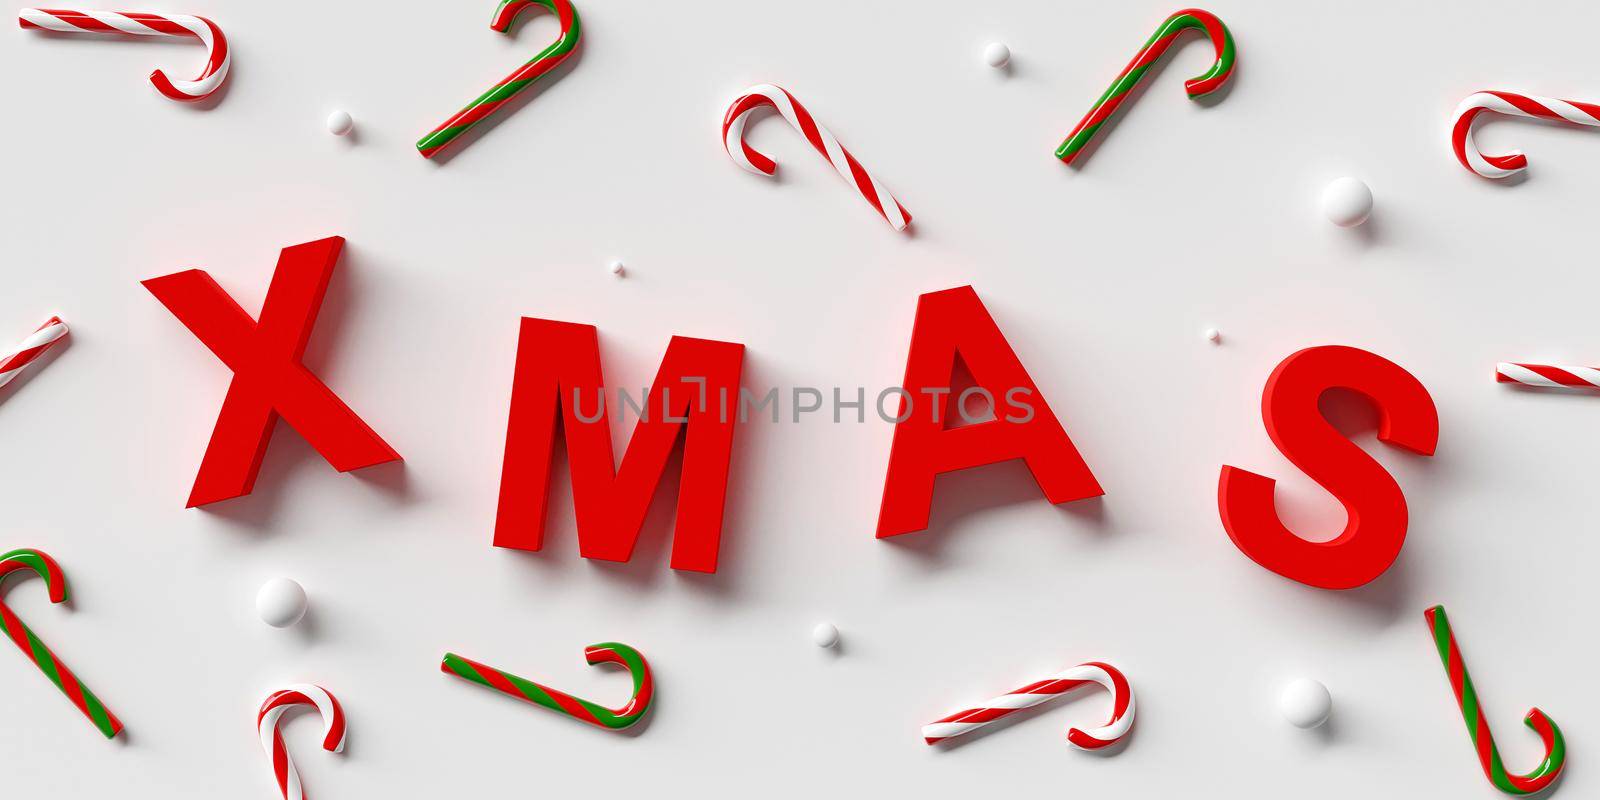 Merry Christmas and Happy New Year, Red letters XMAS with Christmas decoration on white background, 3d rendering by nutzchotwarut